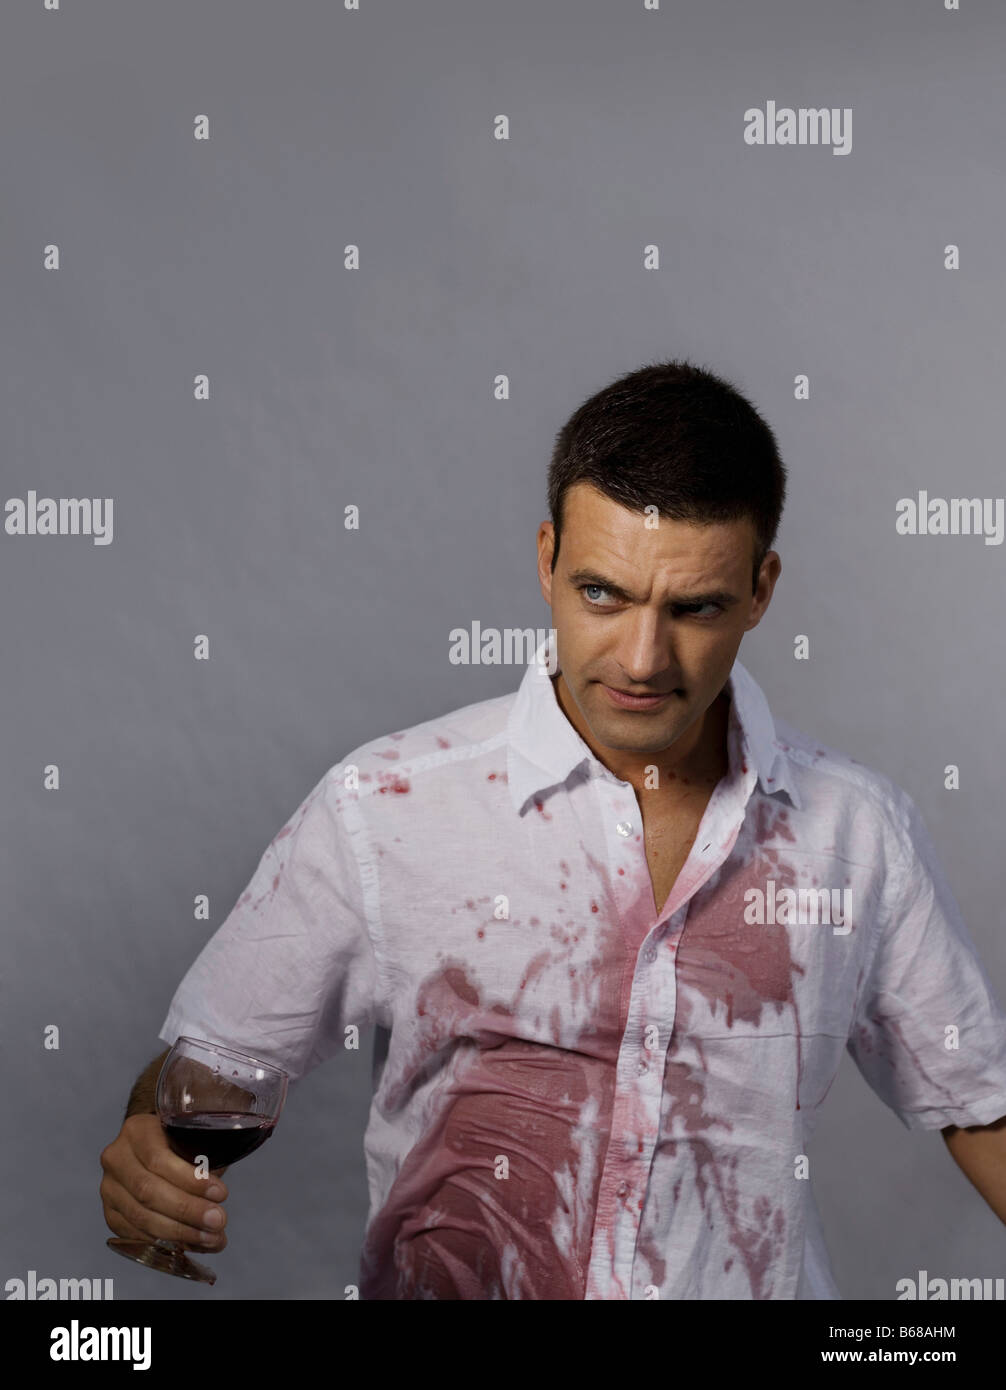 Man with red wine on his shirt Stock Photo - Alamy